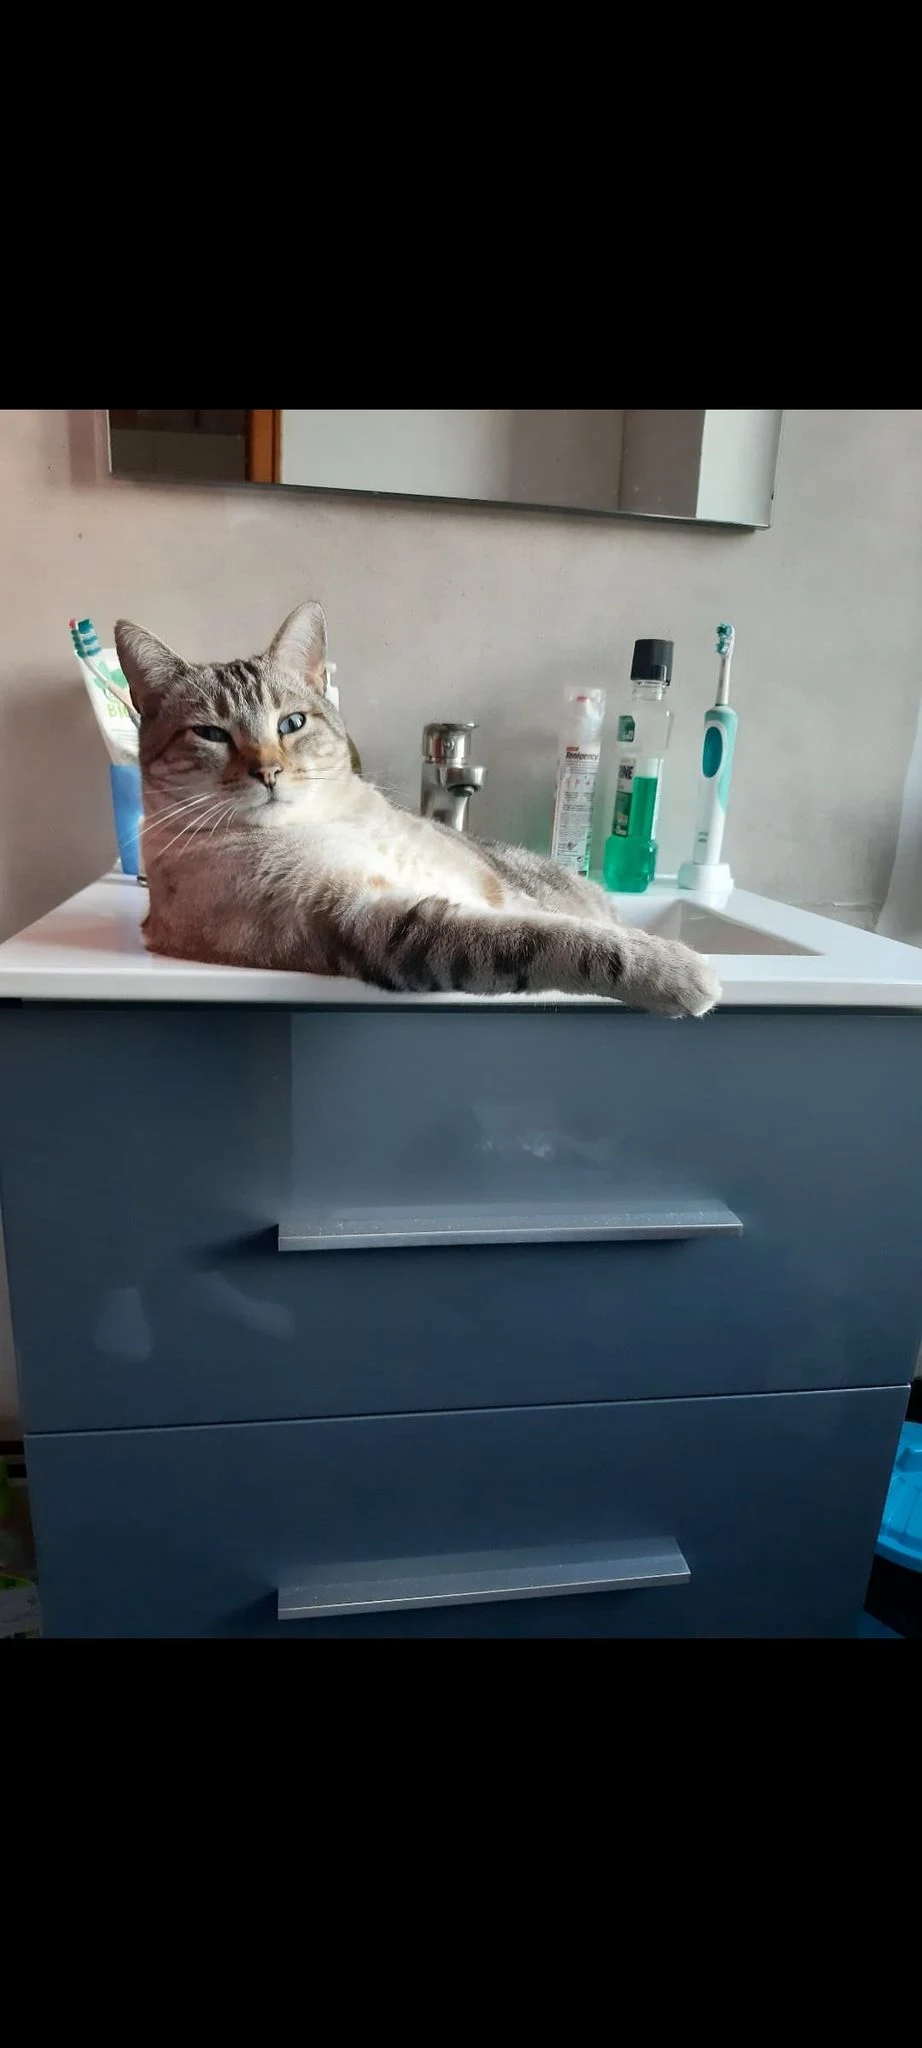 This cat in a sink